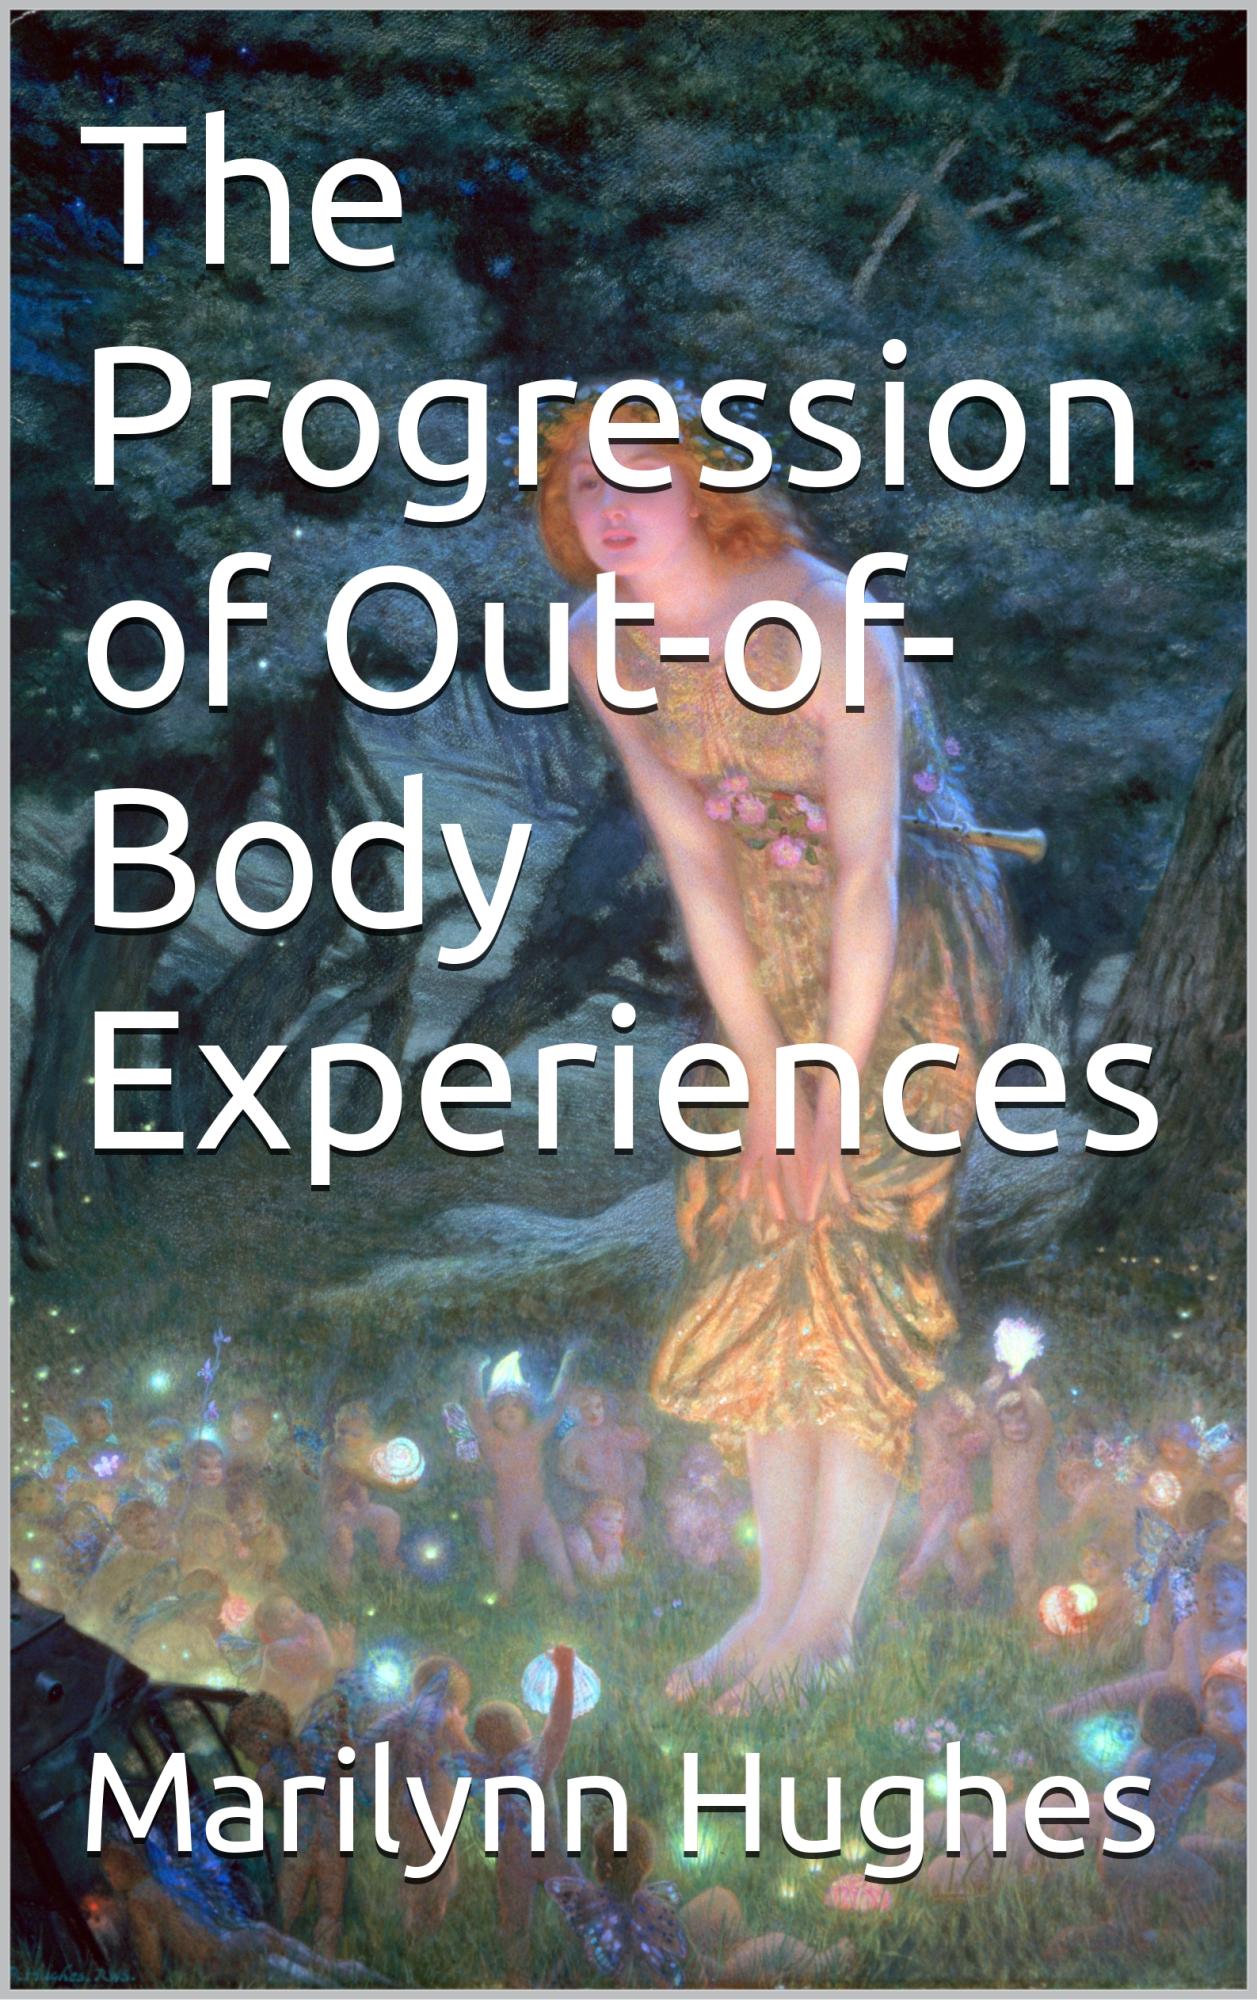 Get a glimpse into the evolutionary nature of how out-of-body experiences progress. - An Out-of-Body Travel Book by Marilynn Hughes